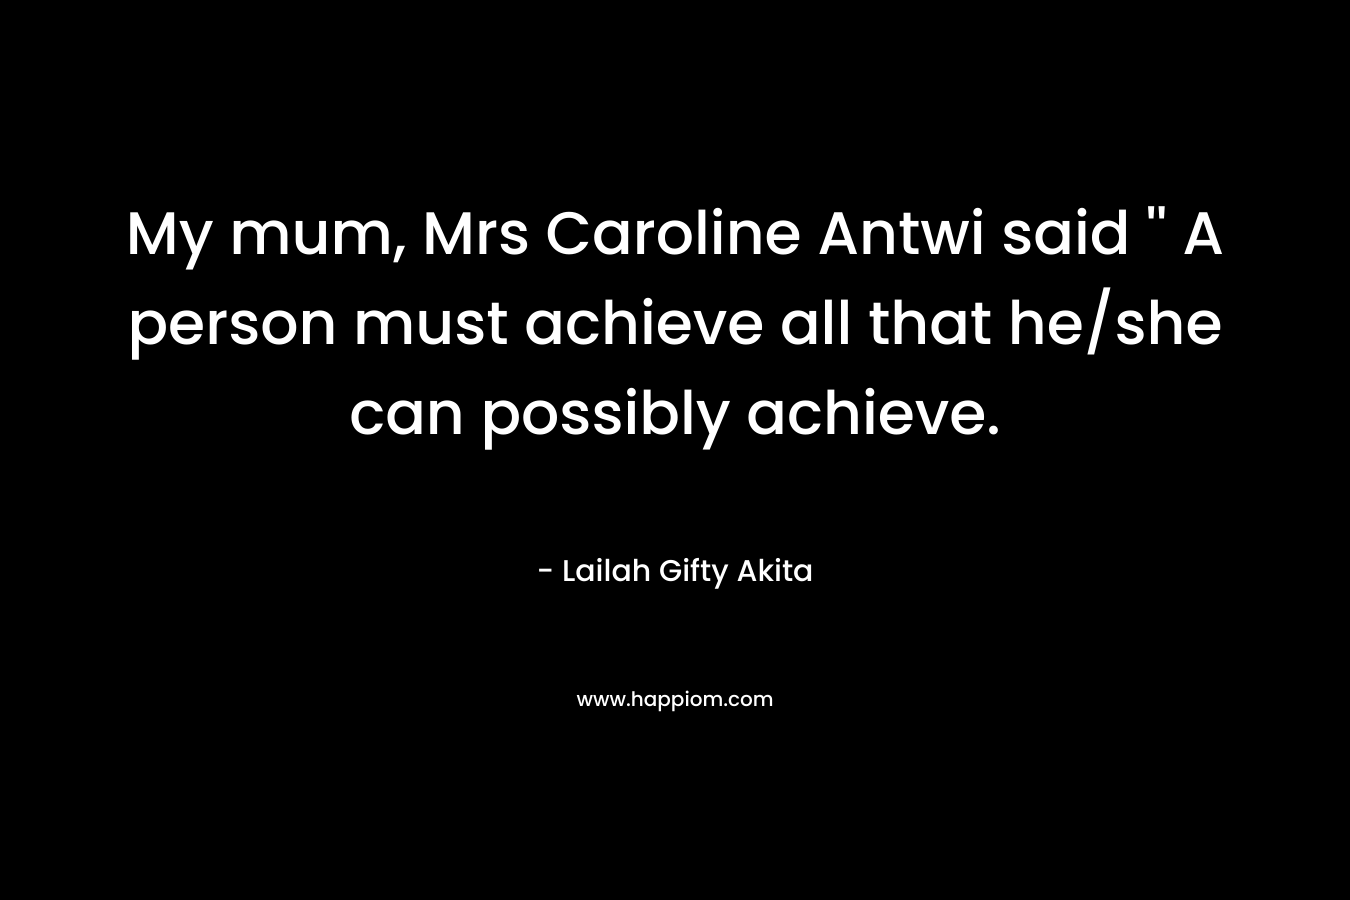 My mum, Mrs Caroline Antwi said '' A person must achieve all that he/she can possibly achieve.